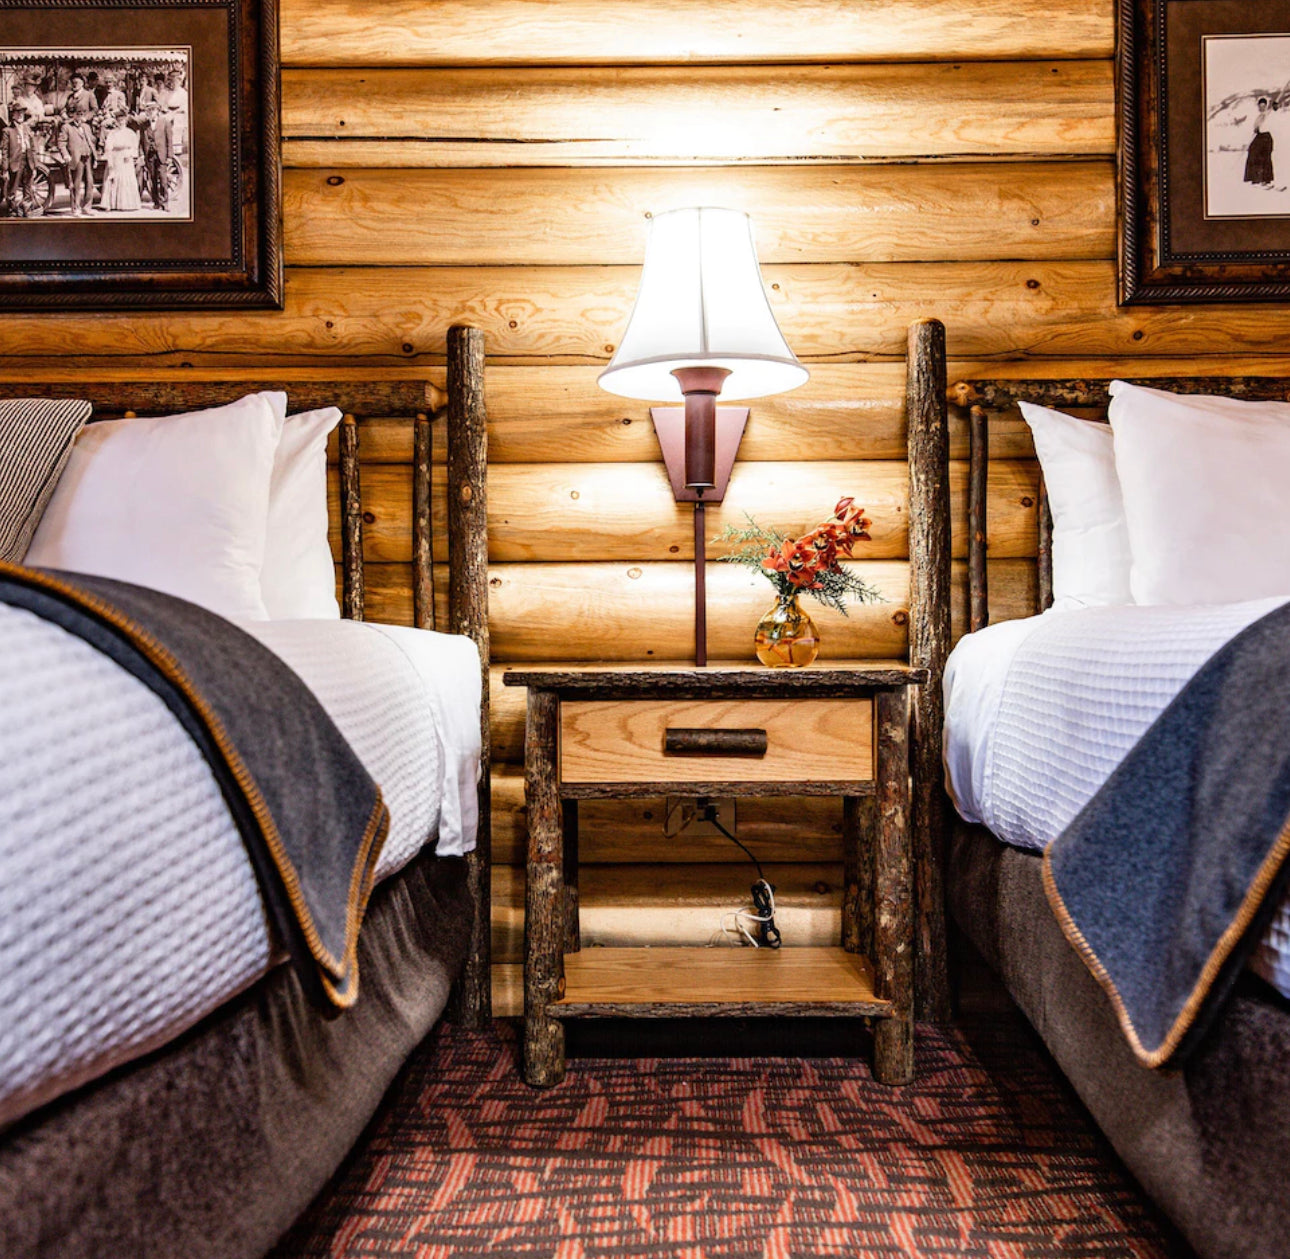  A rustic bedroom setting with two beds flanking a nightstand made of natural wood logs, a table lamp with a white shade, and historical framed pictures on a log cabin wall, evoking a cozy, traditional atmosphere.